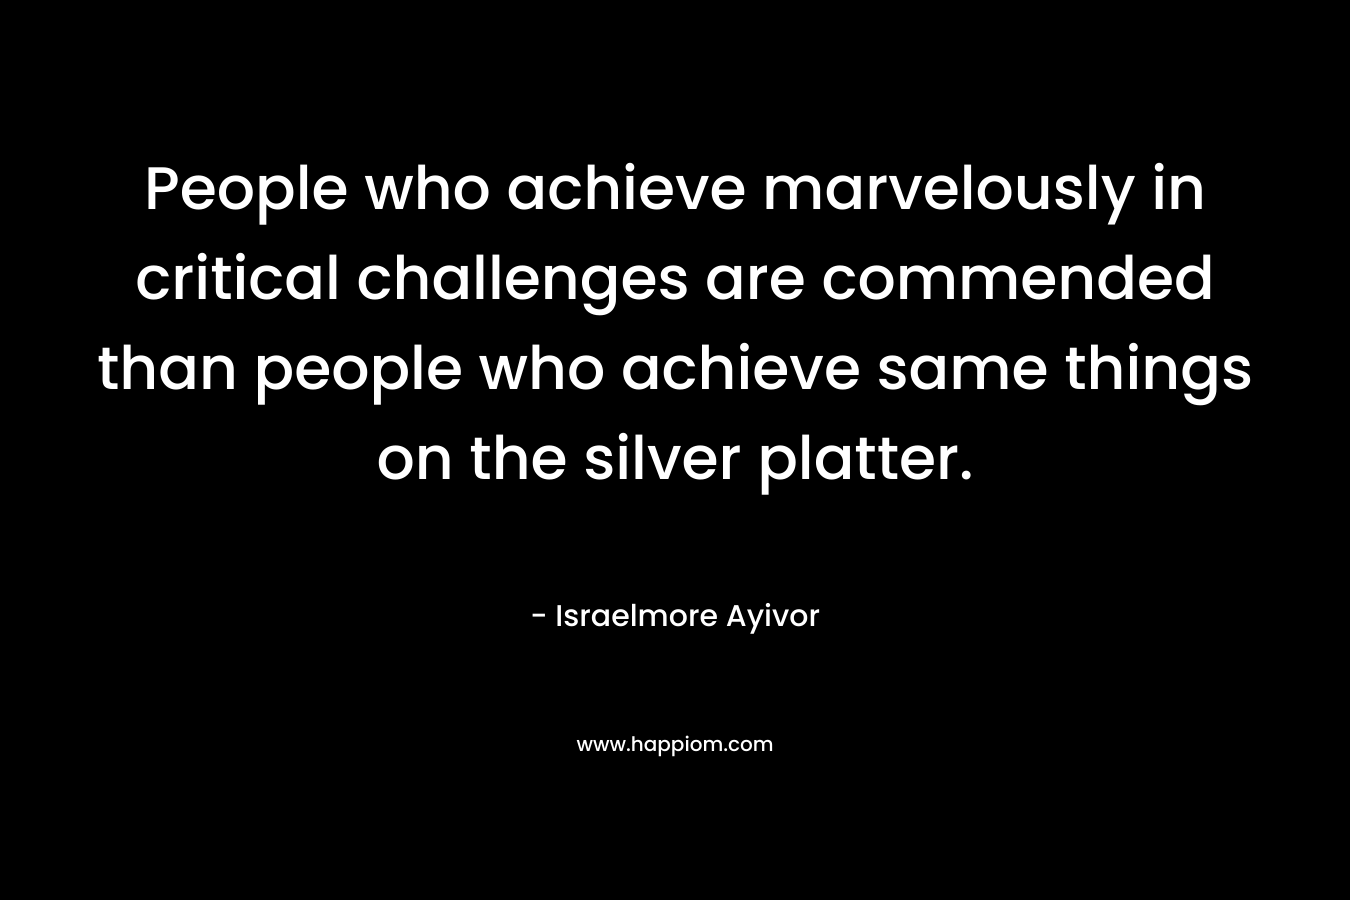 People who achieve marvelously in critical challenges are commended than people who achieve same things on the silver platter.